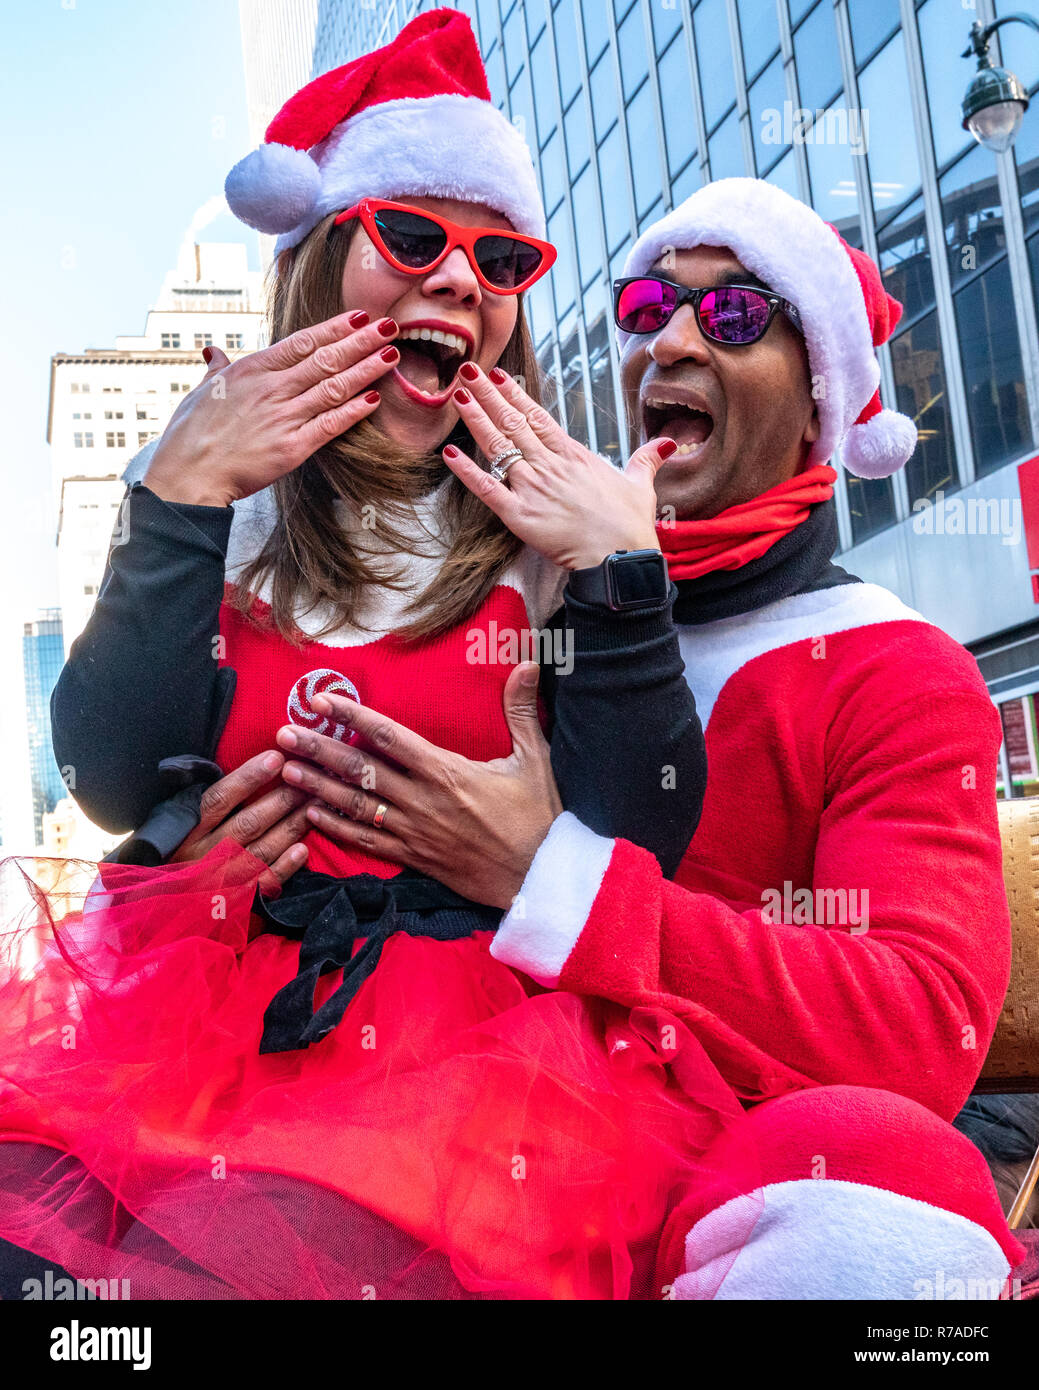 New York, USA, 8th December 2018. Revelers dressed as Santa Claus have fun during the annual SantaCon in New York City. Credit: Enrique Shore/Alamy Live News Stock Photo